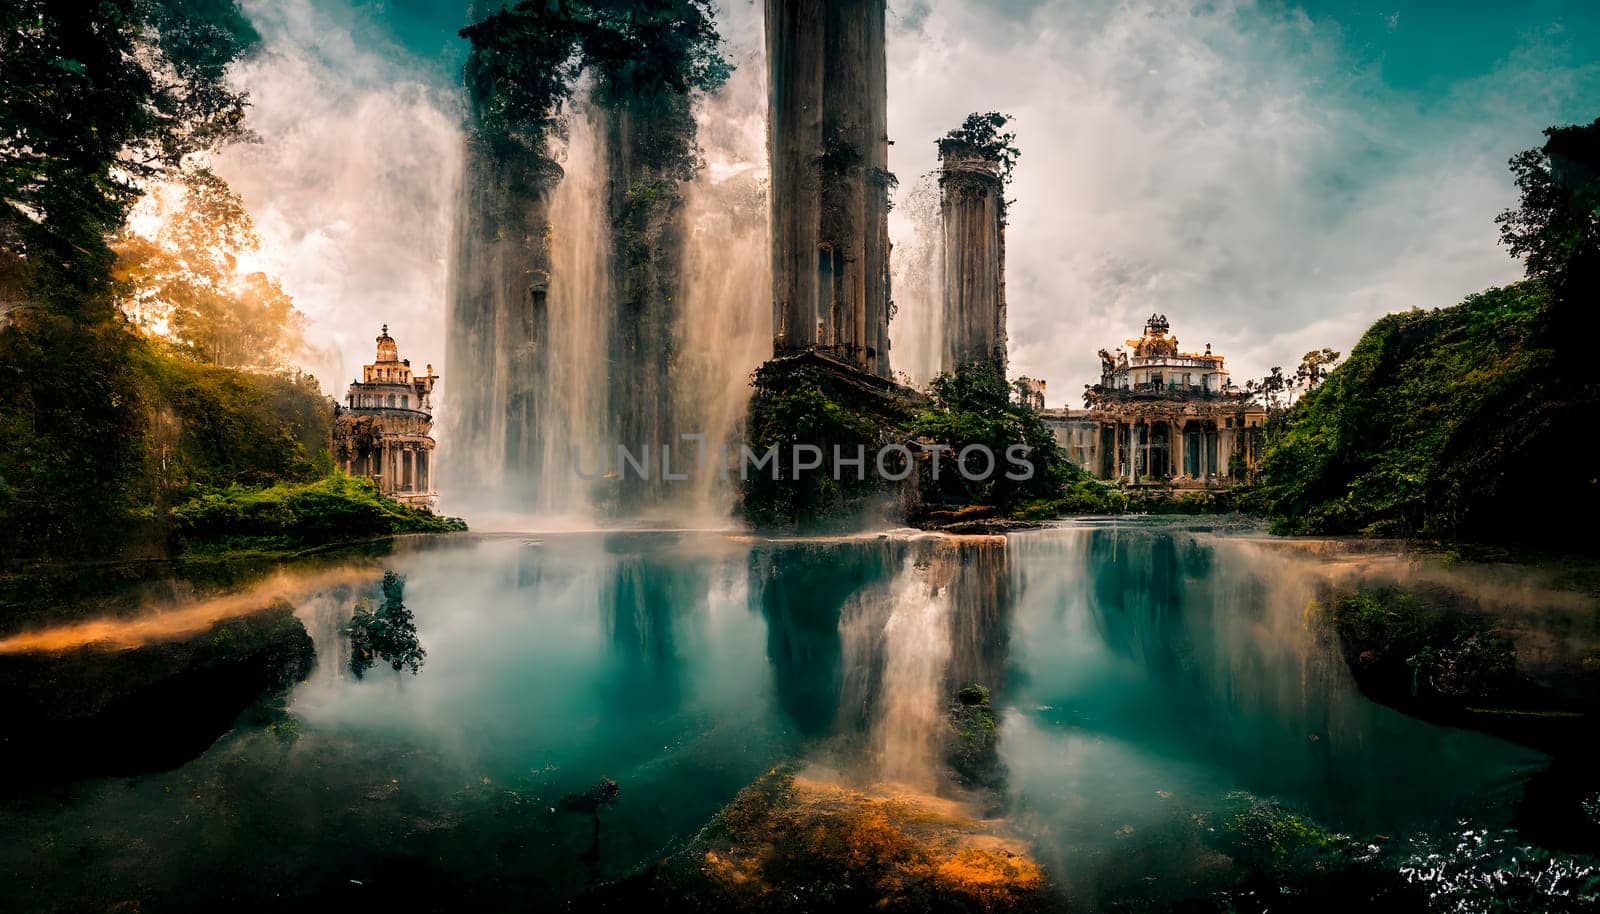 fantasy neo-baroque buildings on green lake with waterfalls, neural network generated art. Digitally generated image. Not based on any actual scene or pattern.